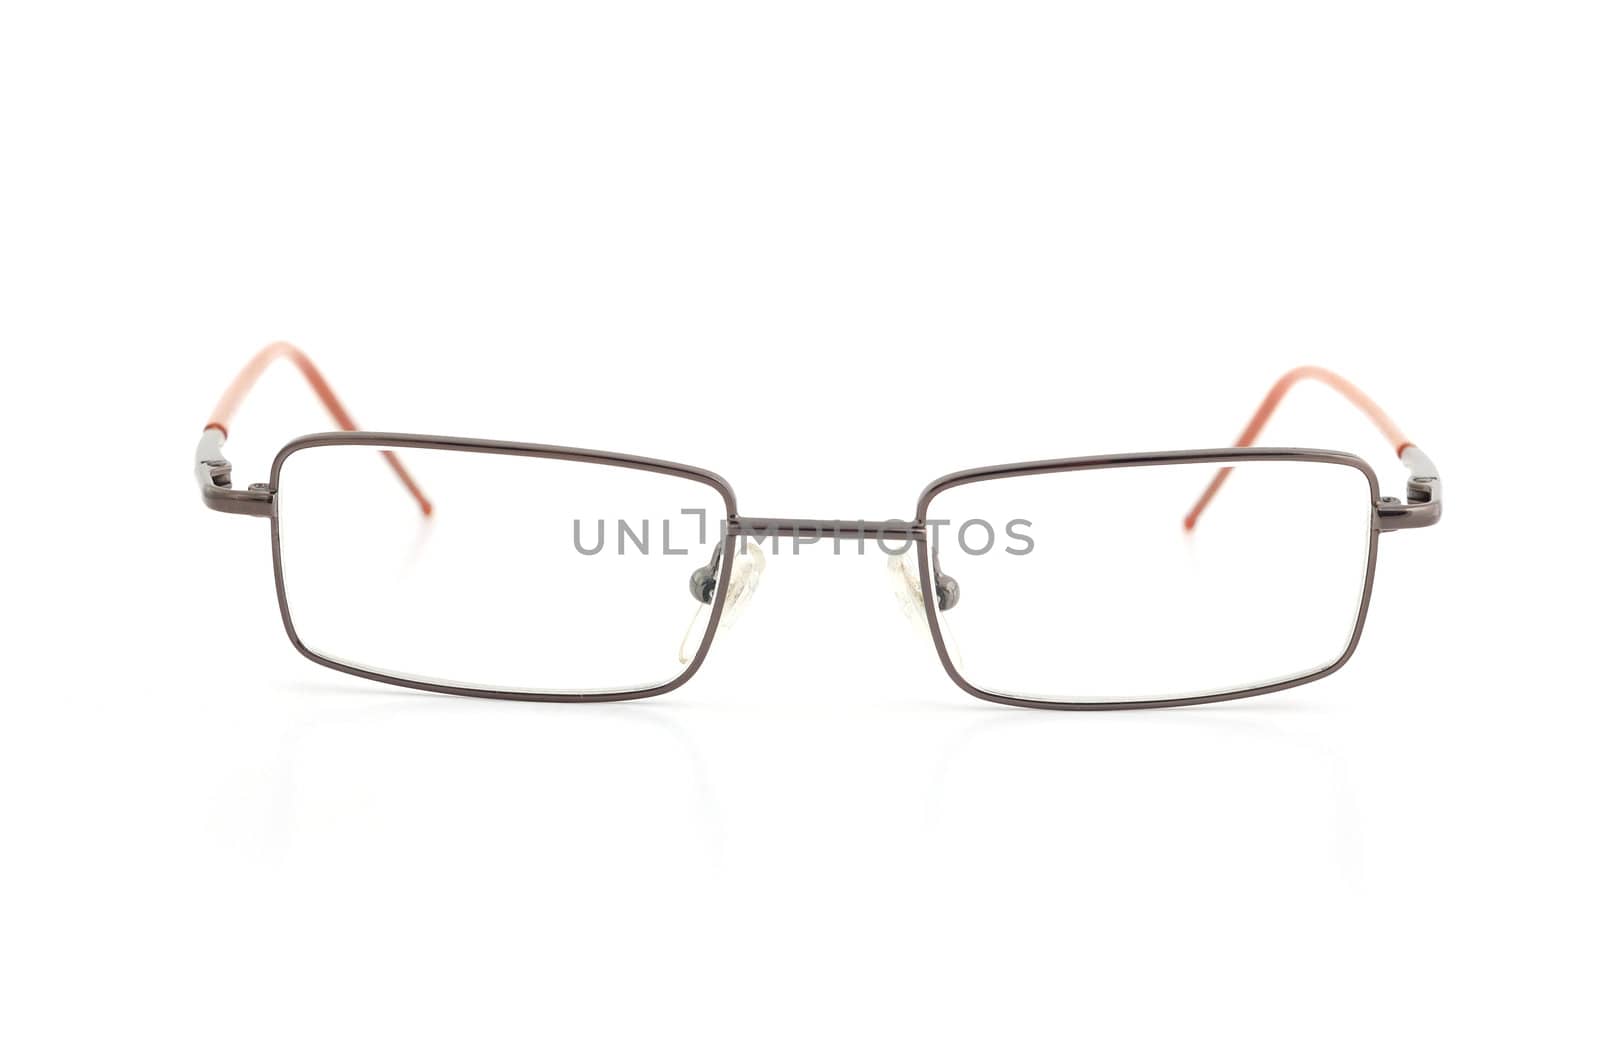 dioptric spectacles on white background